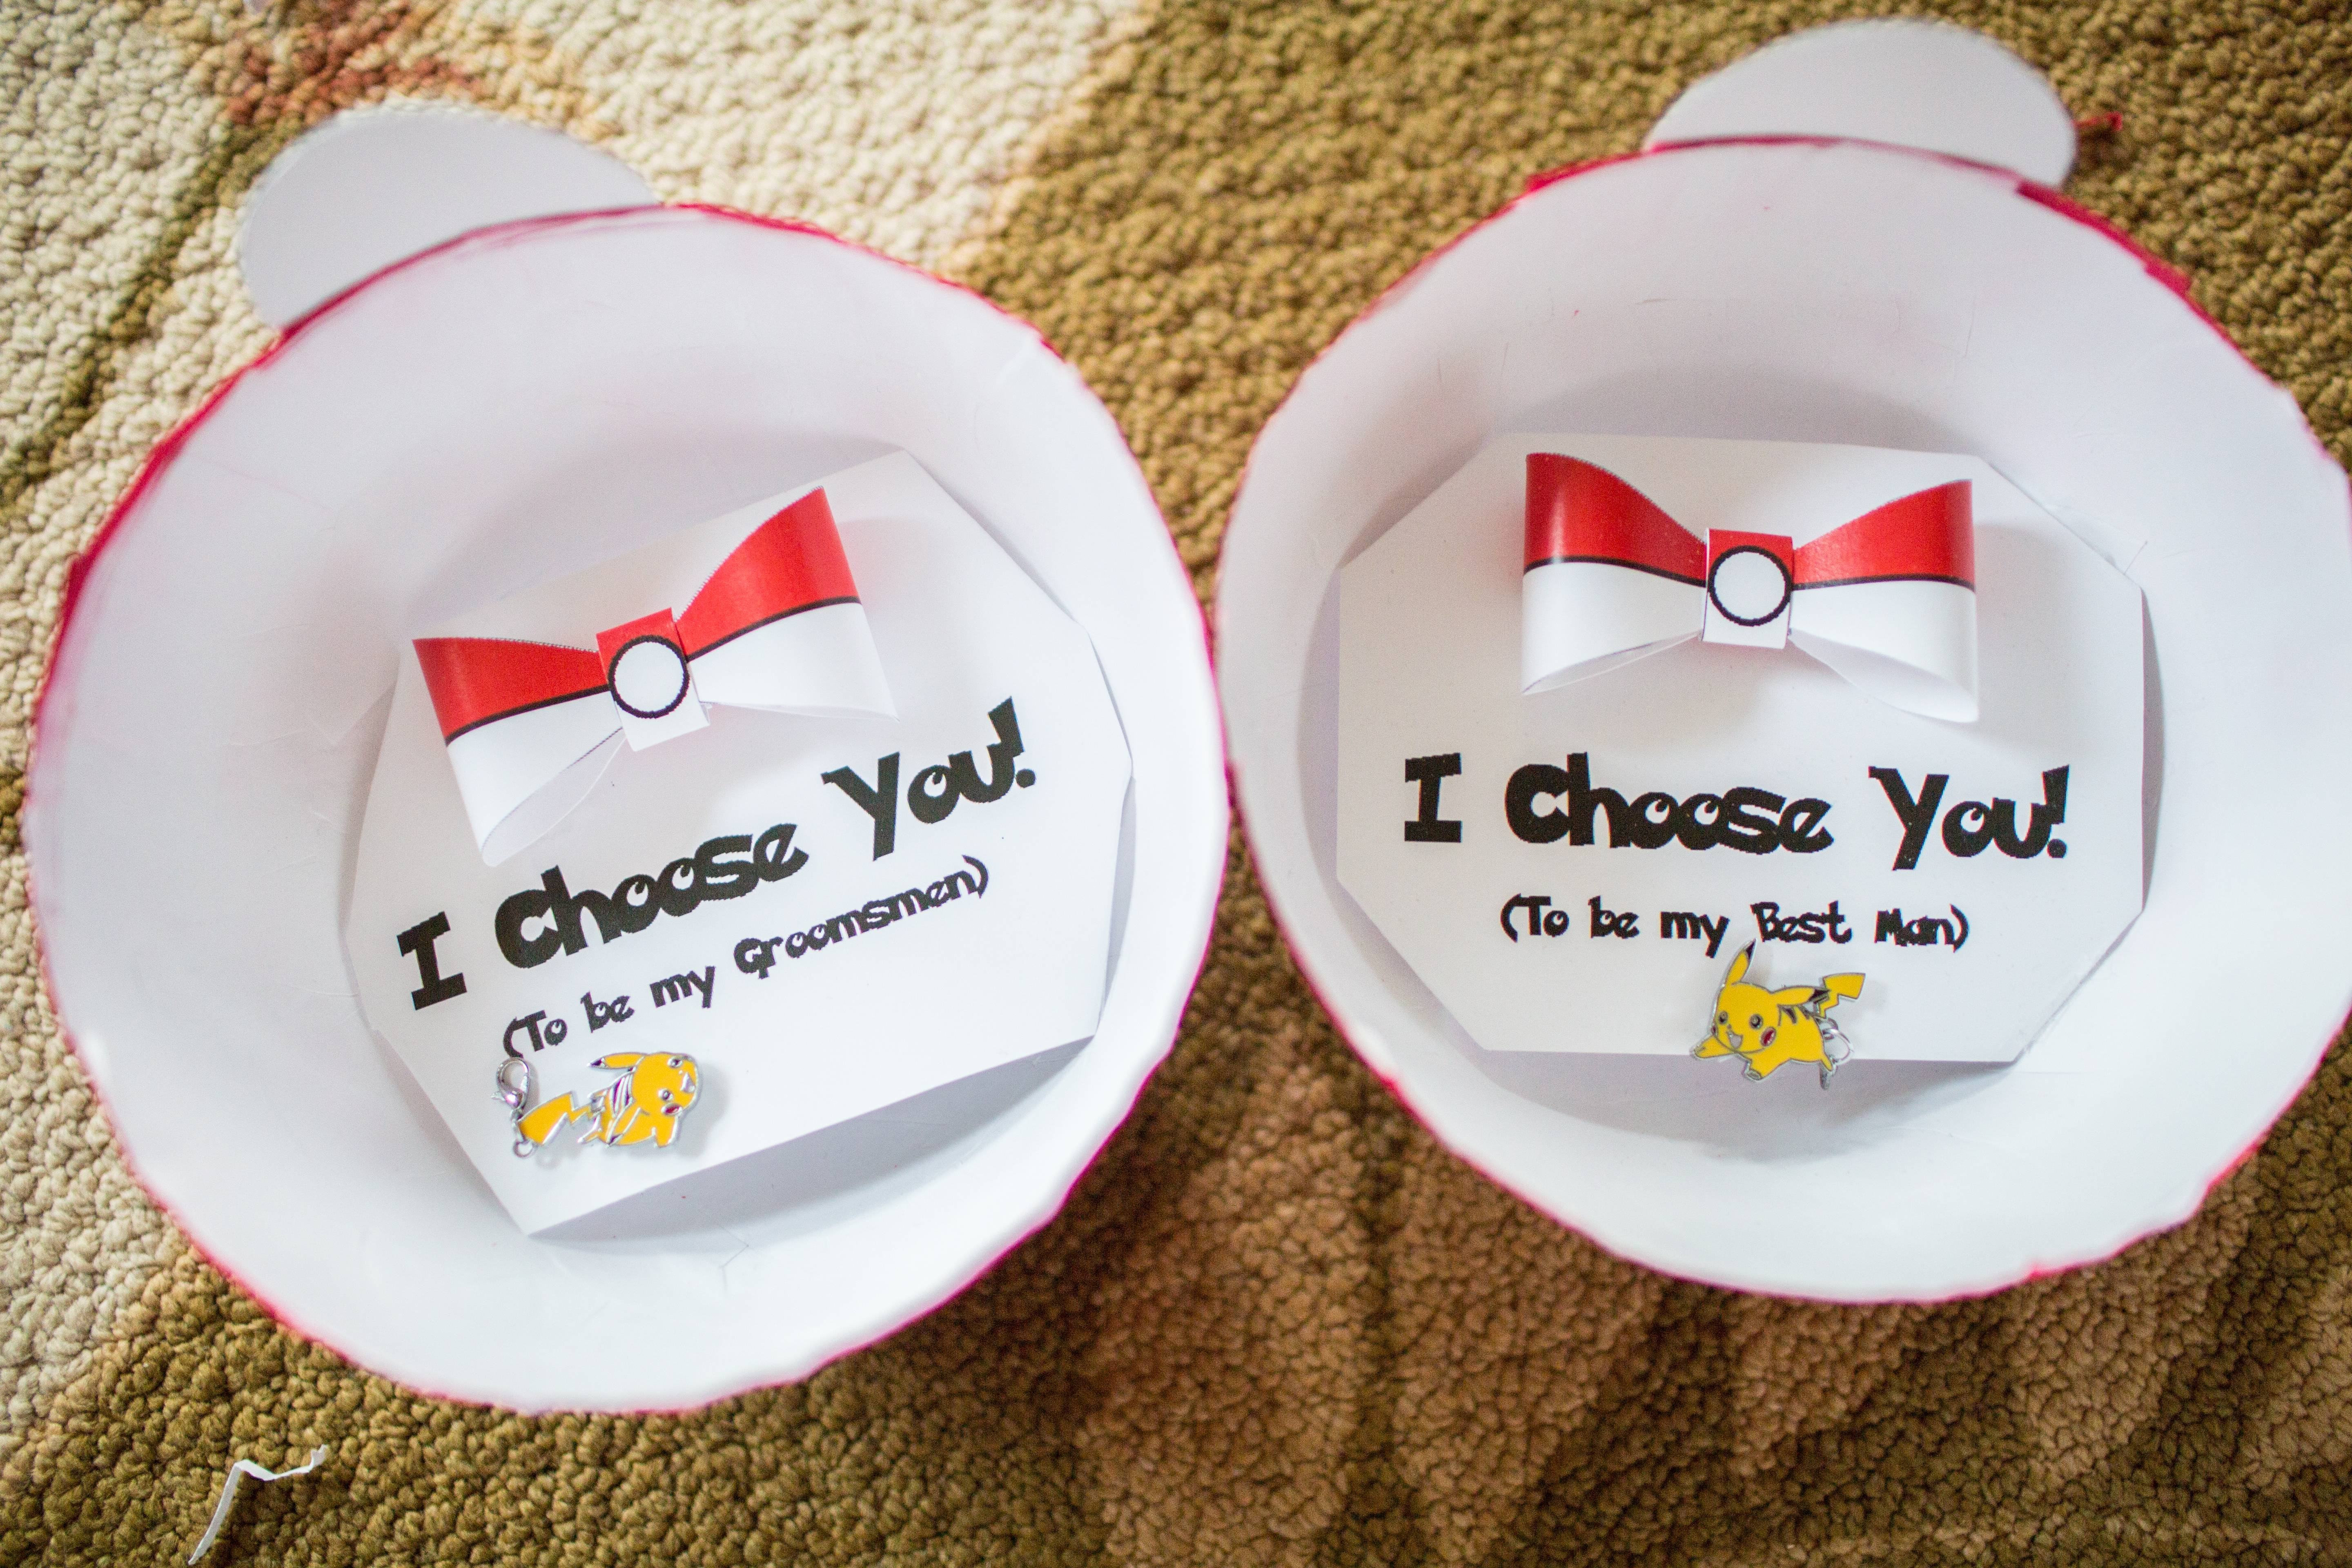 How To Make A Origami Pokeball That Opens I Choose You To Be My Groomsmen Album On Imgur